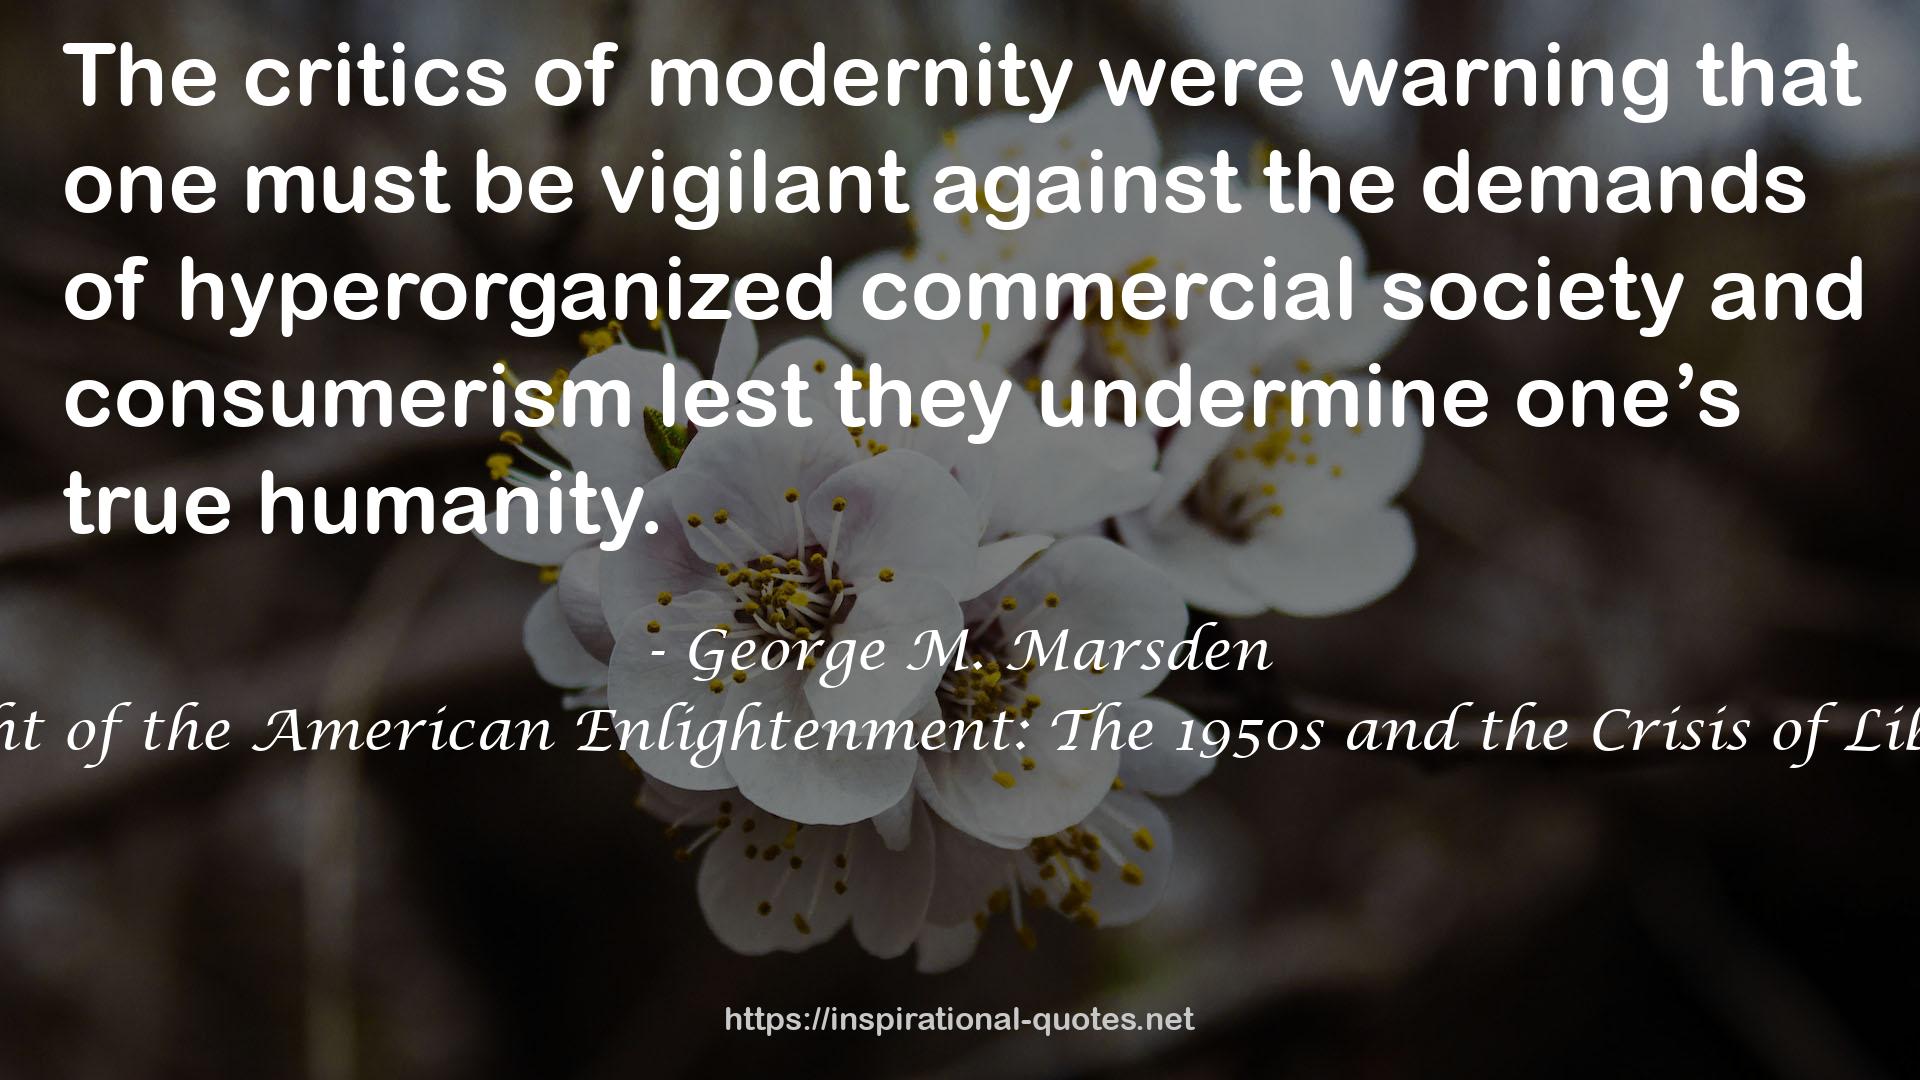 The Twilight of the American Enlightenment: The 1950s and the Crisis of Liberal Belief QUOTES